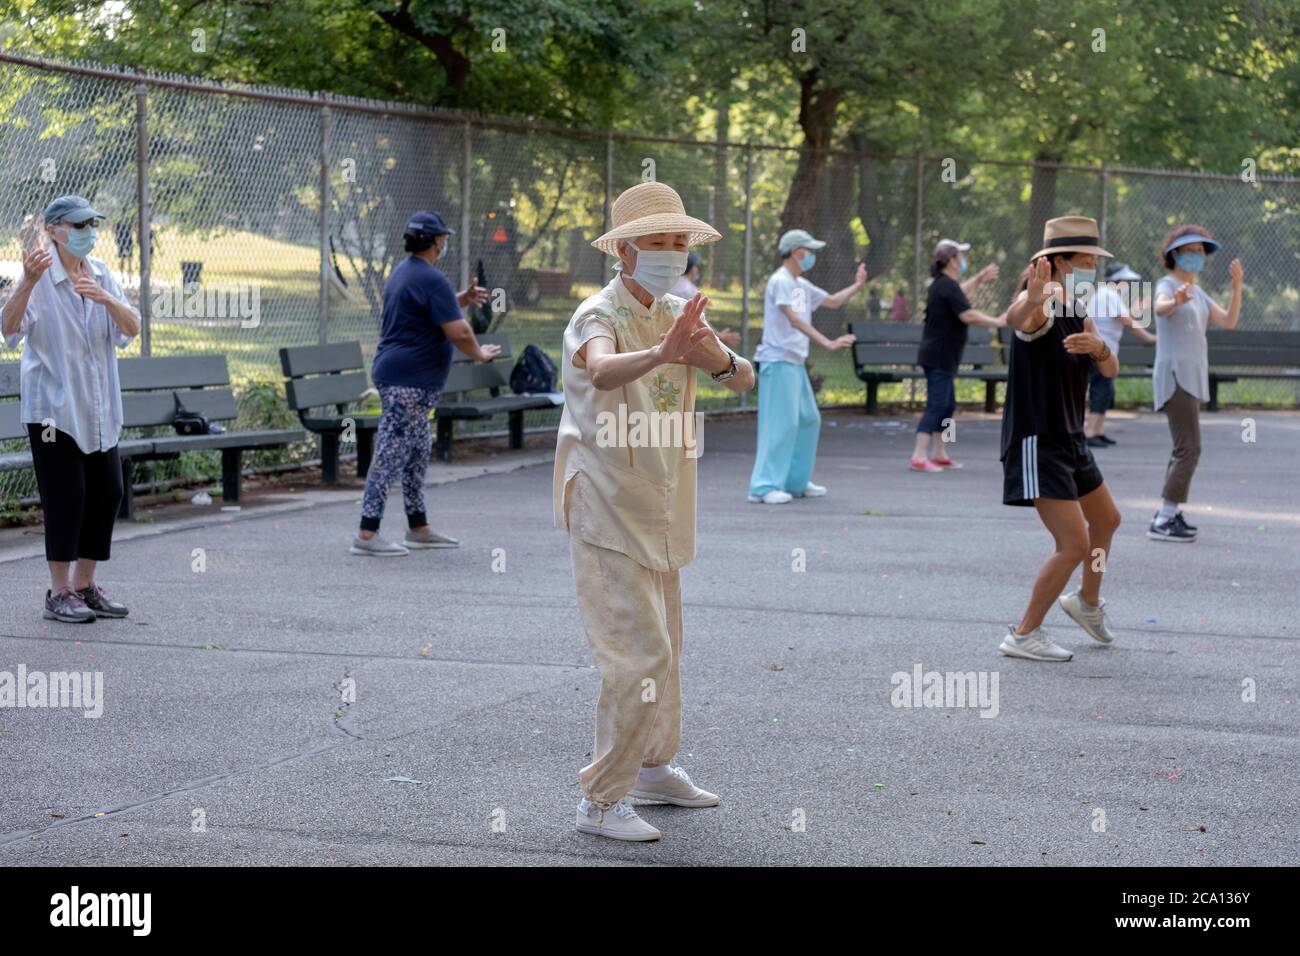 Men & women of various ages and ethnicities attend a morning Tai Chi class wearing surgical masks and social distancing. in Queens, New York City. Stock Photo